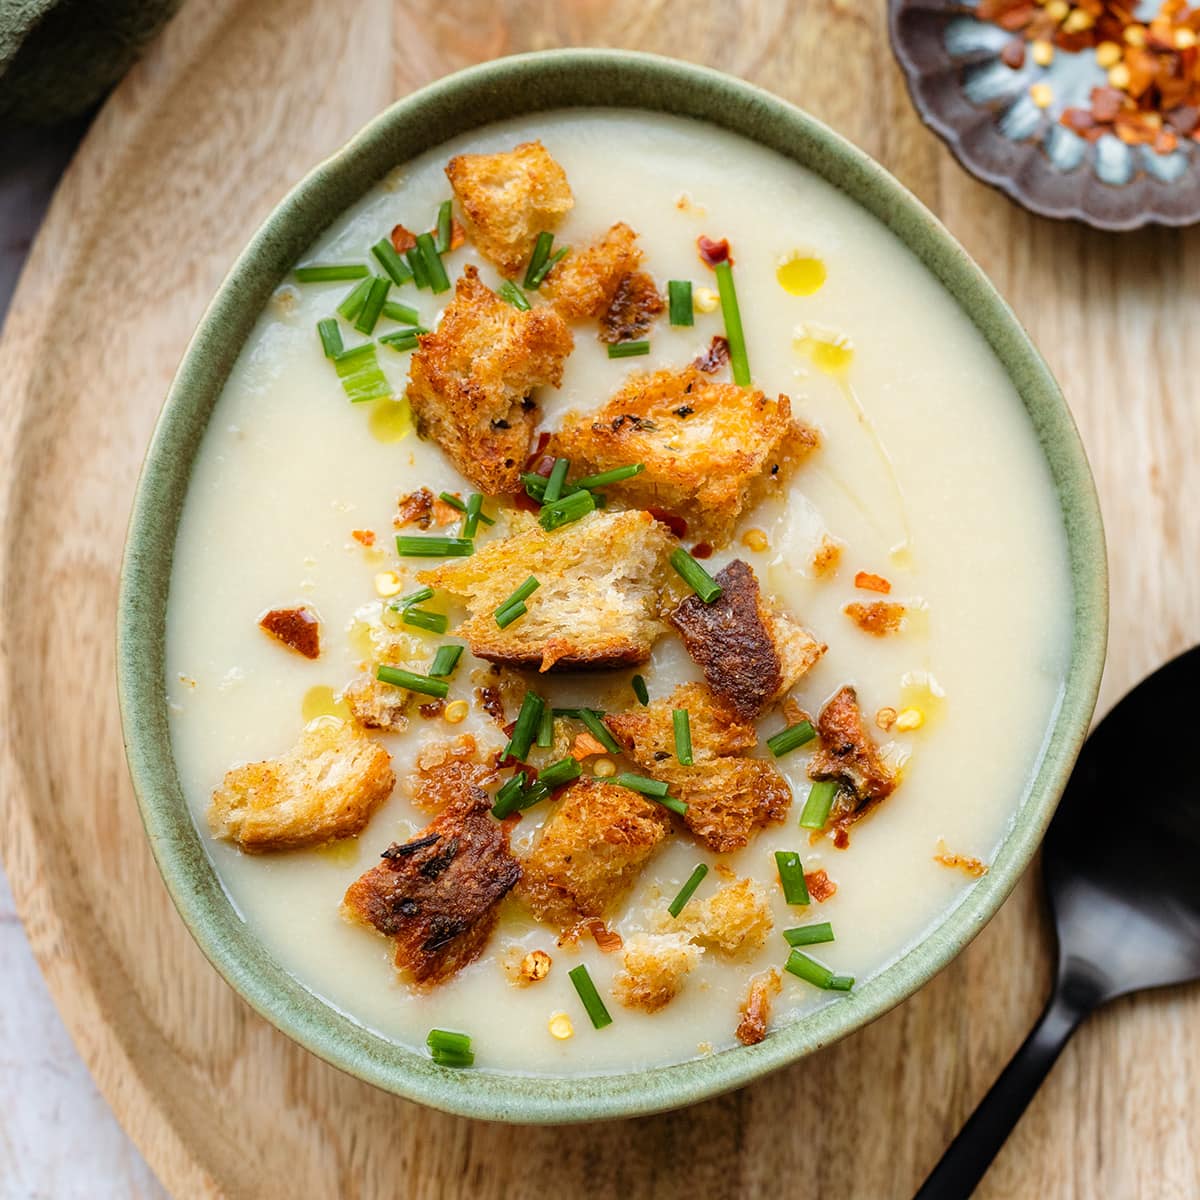 Cauliflower soup topped with croutons and fresh herbs in a green bowl on a wooden decorative plate.